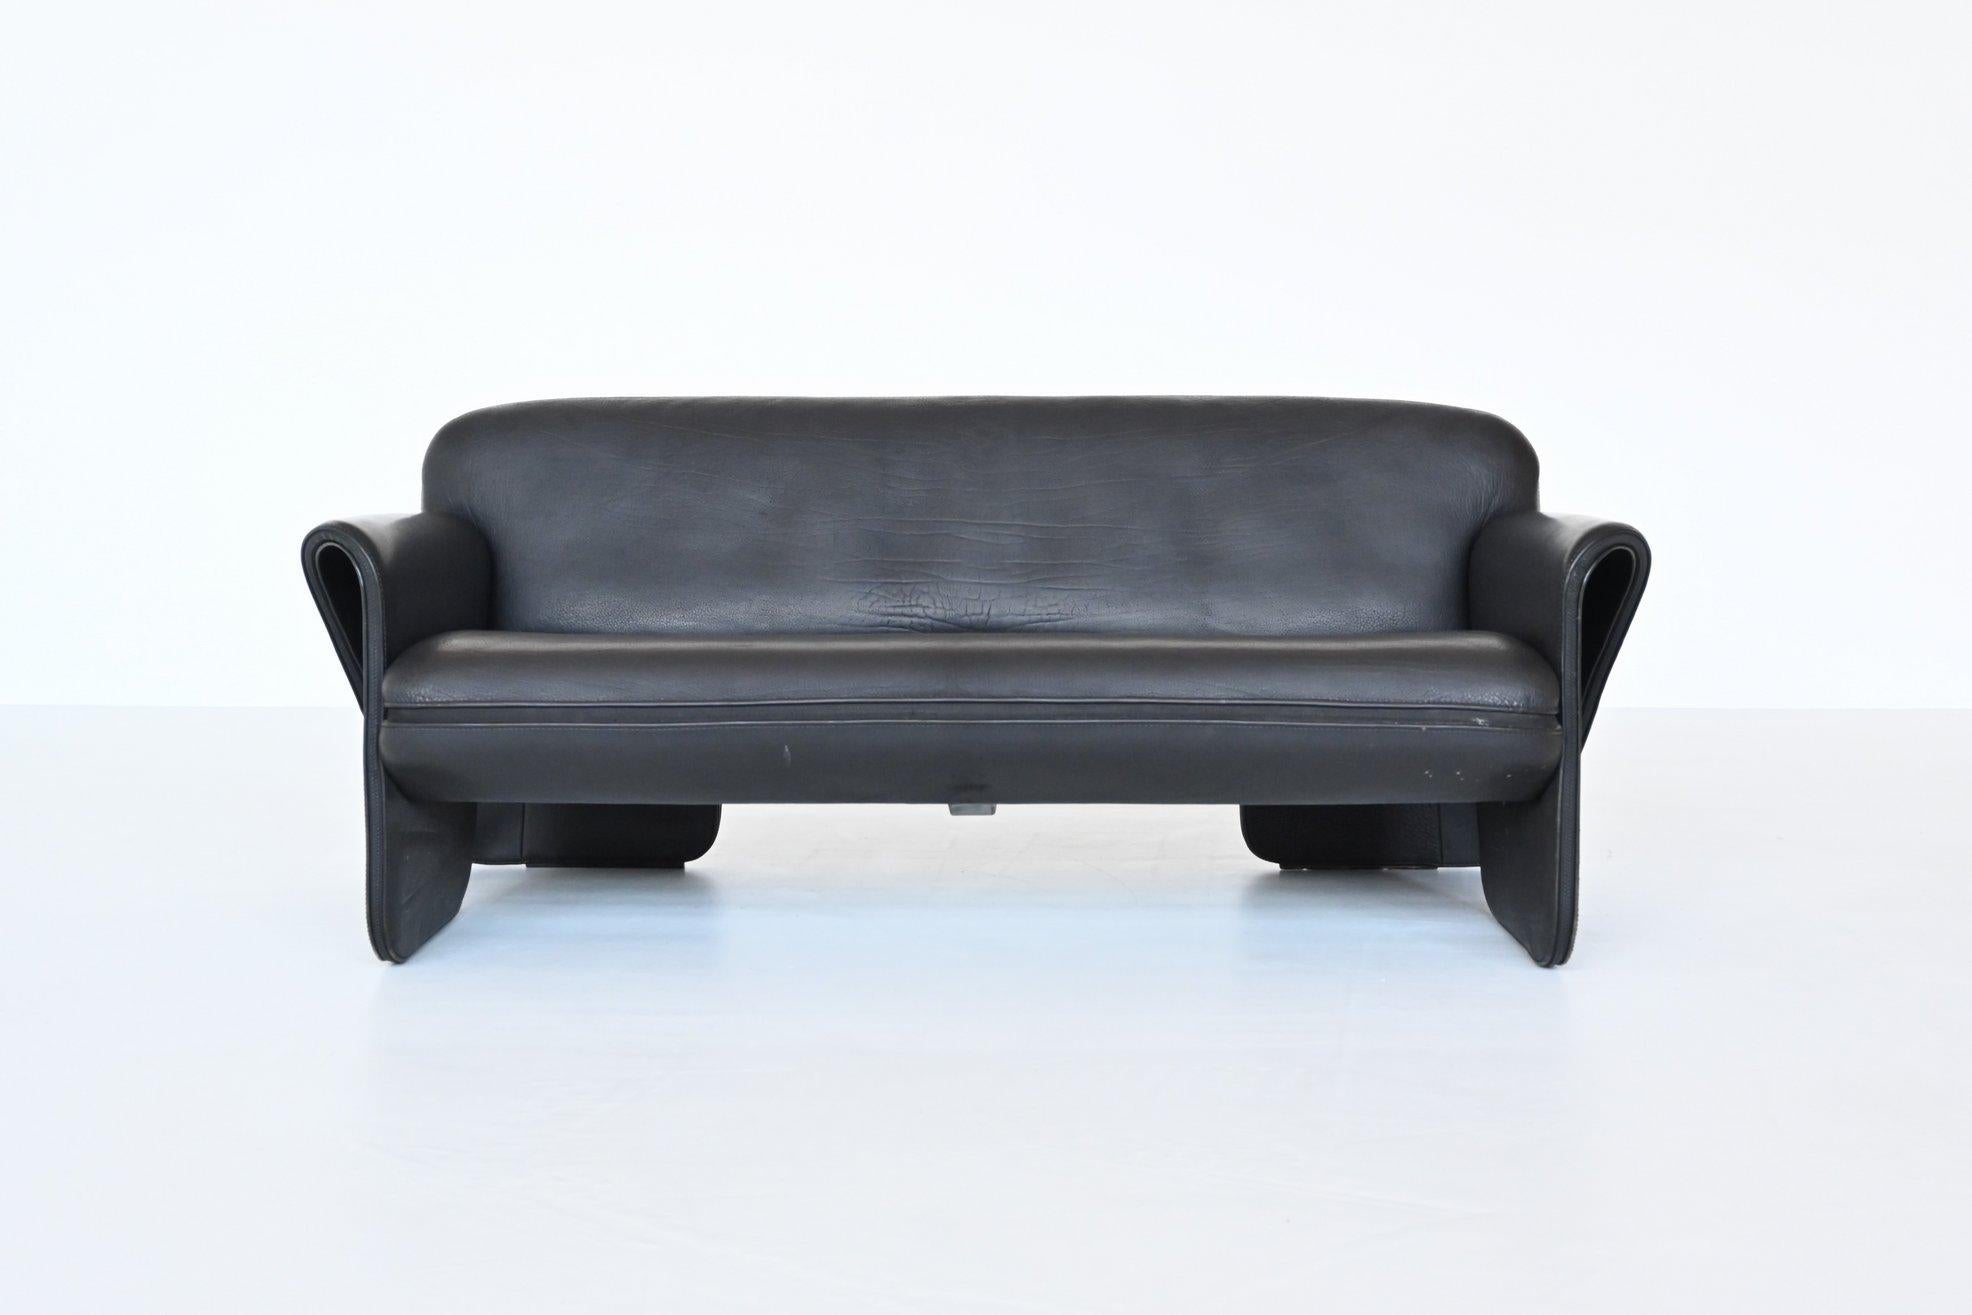 Stunning and rare sofa model DS 125 designed by Gerd Lange for De Sede, Switzerland 1978. This freestanding sculptural sofa is upholstered with 3-5mm thick tan neck leather in black with a decorative zipper seam. This piece is extremely comfortable